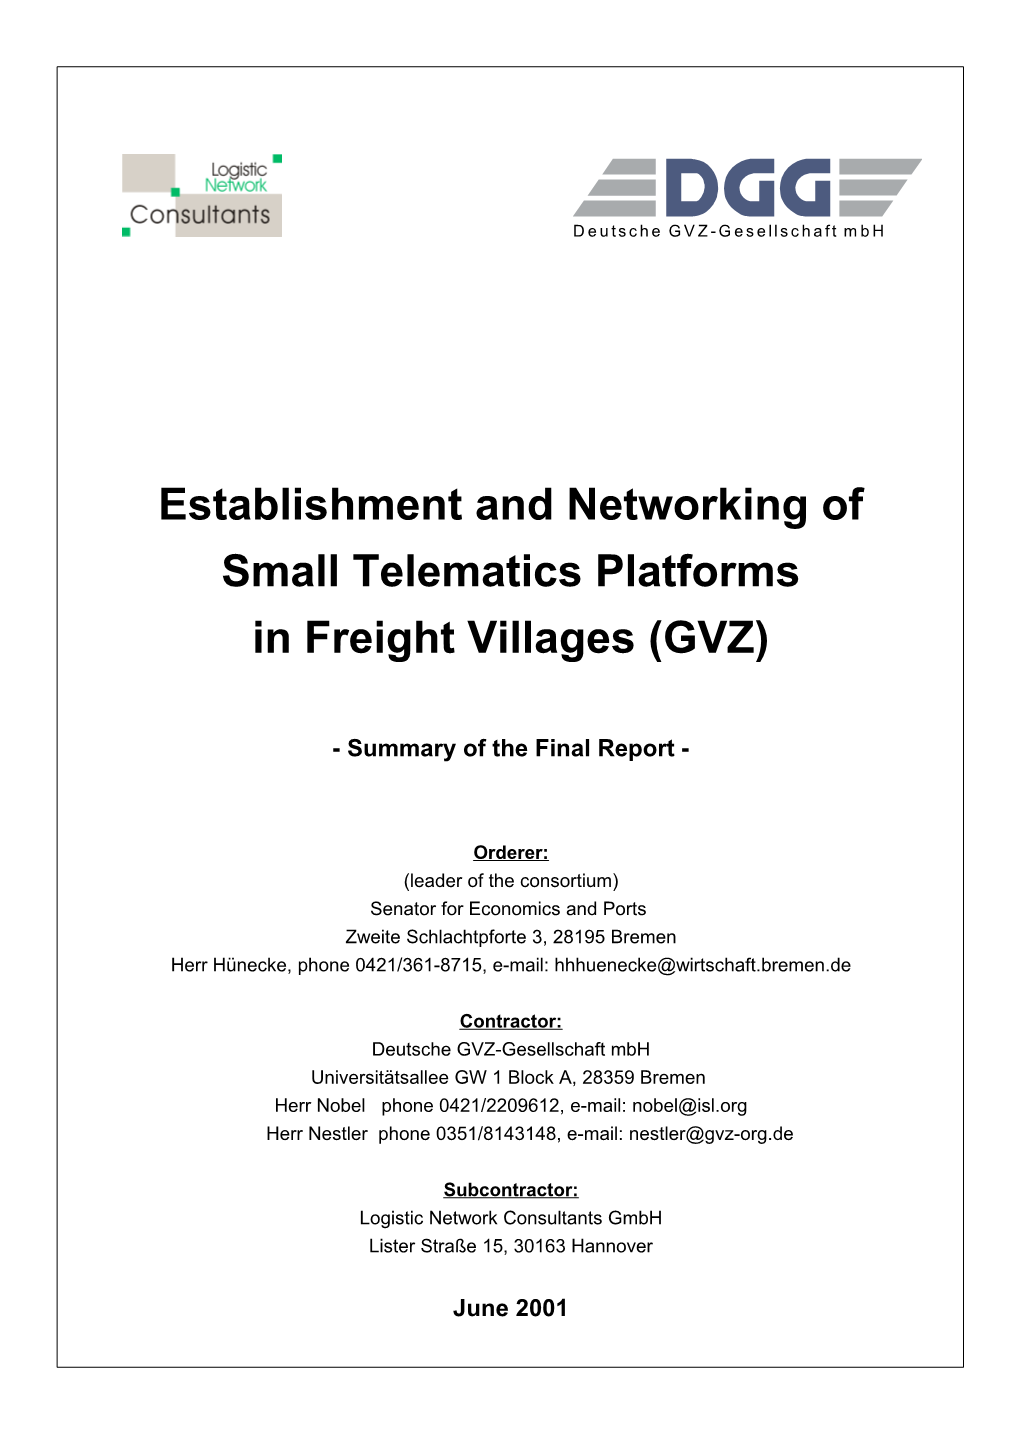 Establishment and Networking of Small Telematics Platforms